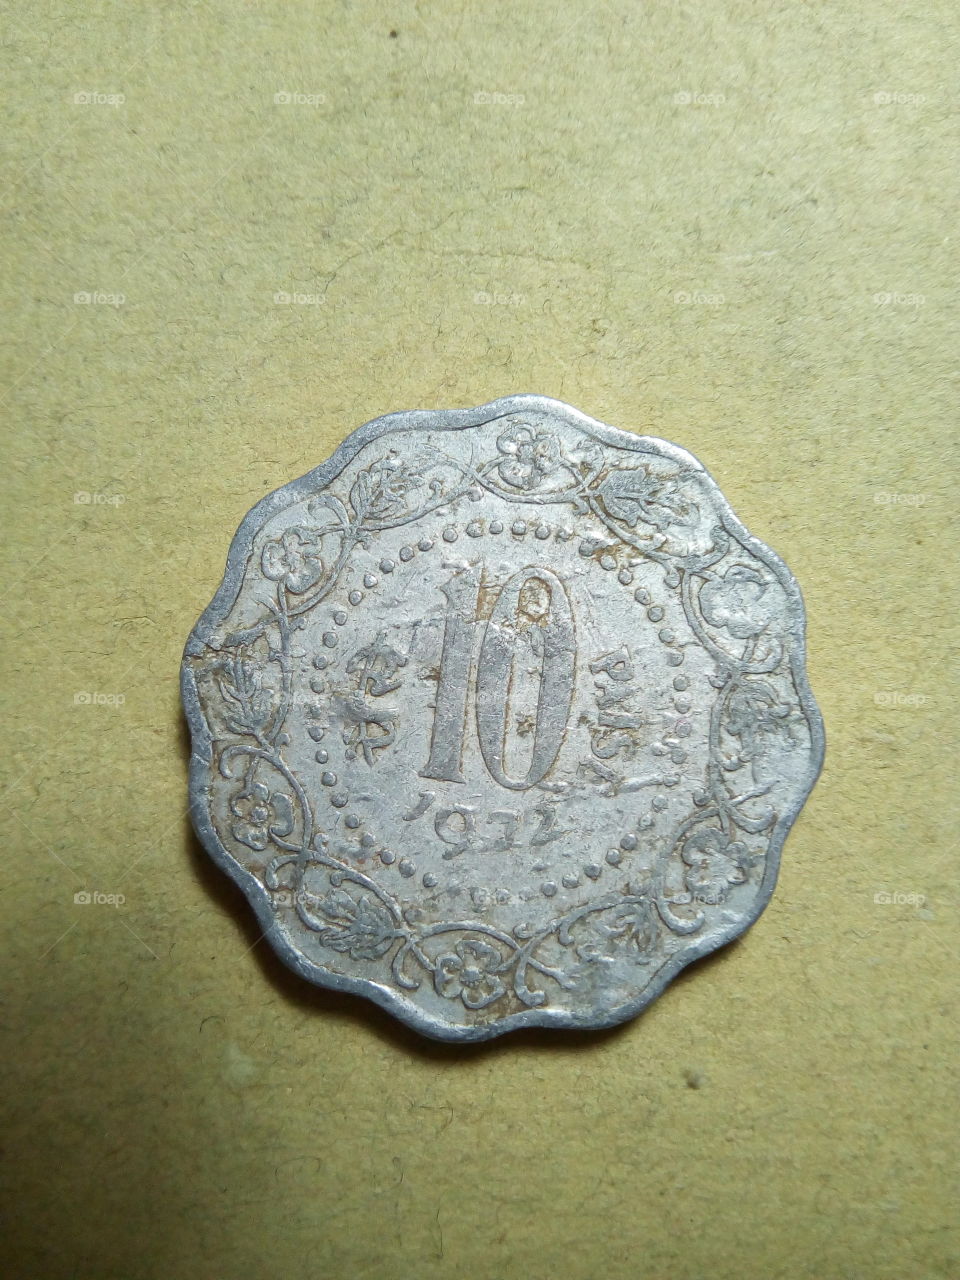 A coin of ten paise- 1/10 share of Indian Rupee issued by Government of India in 1972.